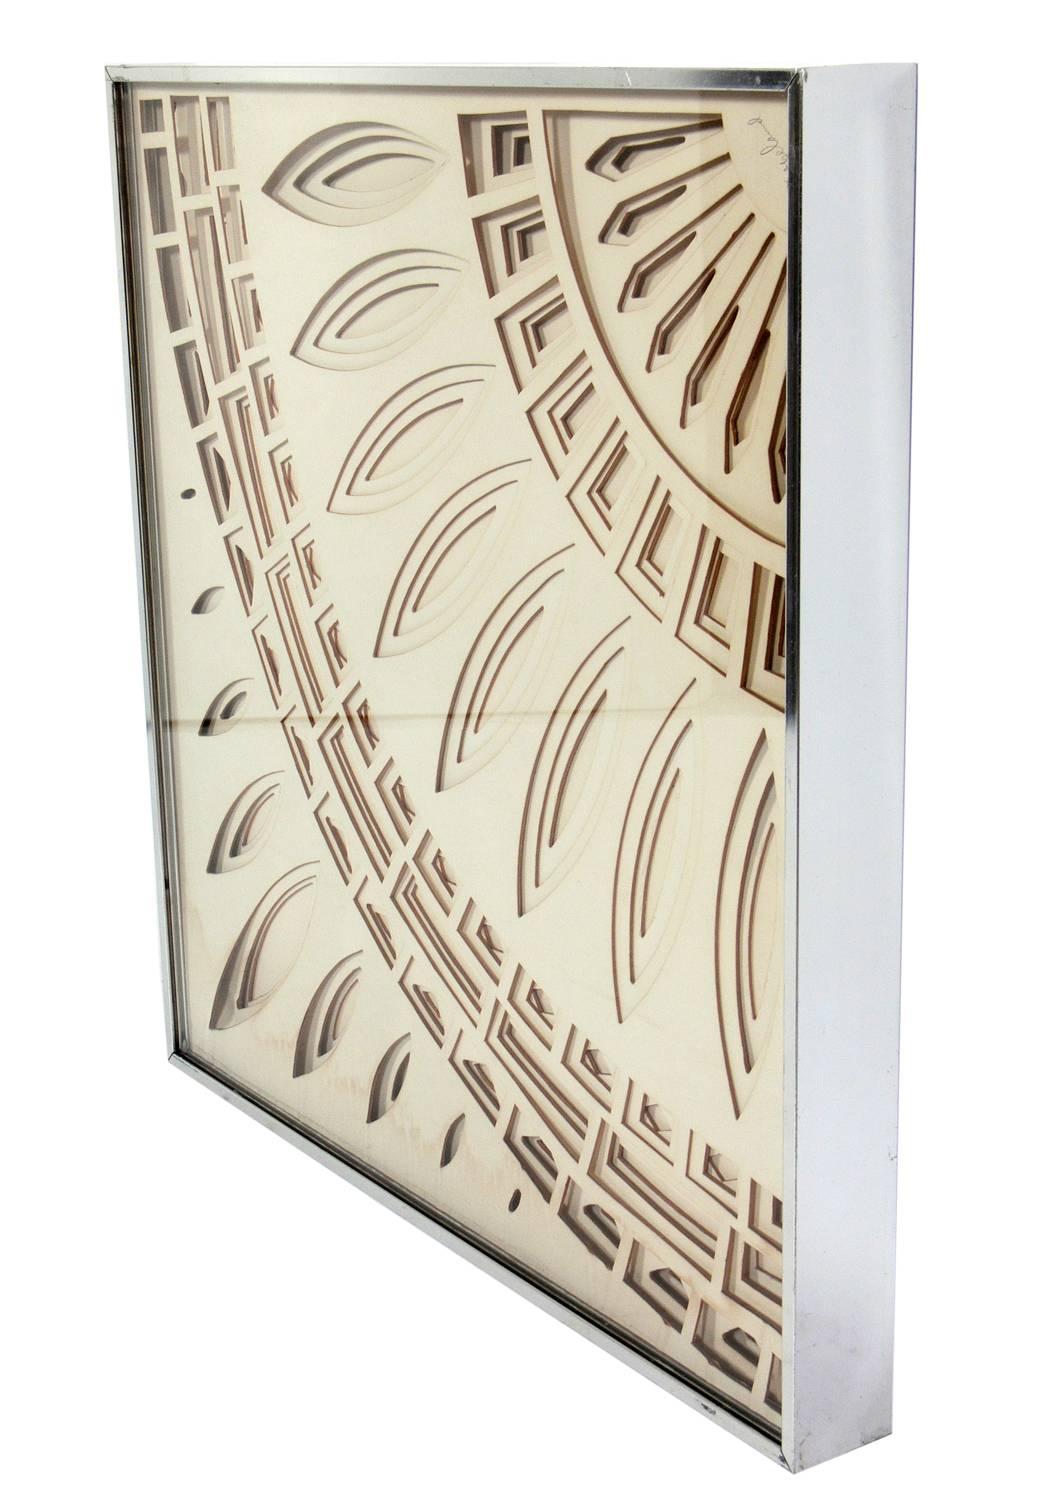 Three-dimensional wall sculpture, designed by Greg Copeland, circa 1970s. All pieces signed by the artist. They retain their original aluminum frames. The price noted is for the set of four framed works.